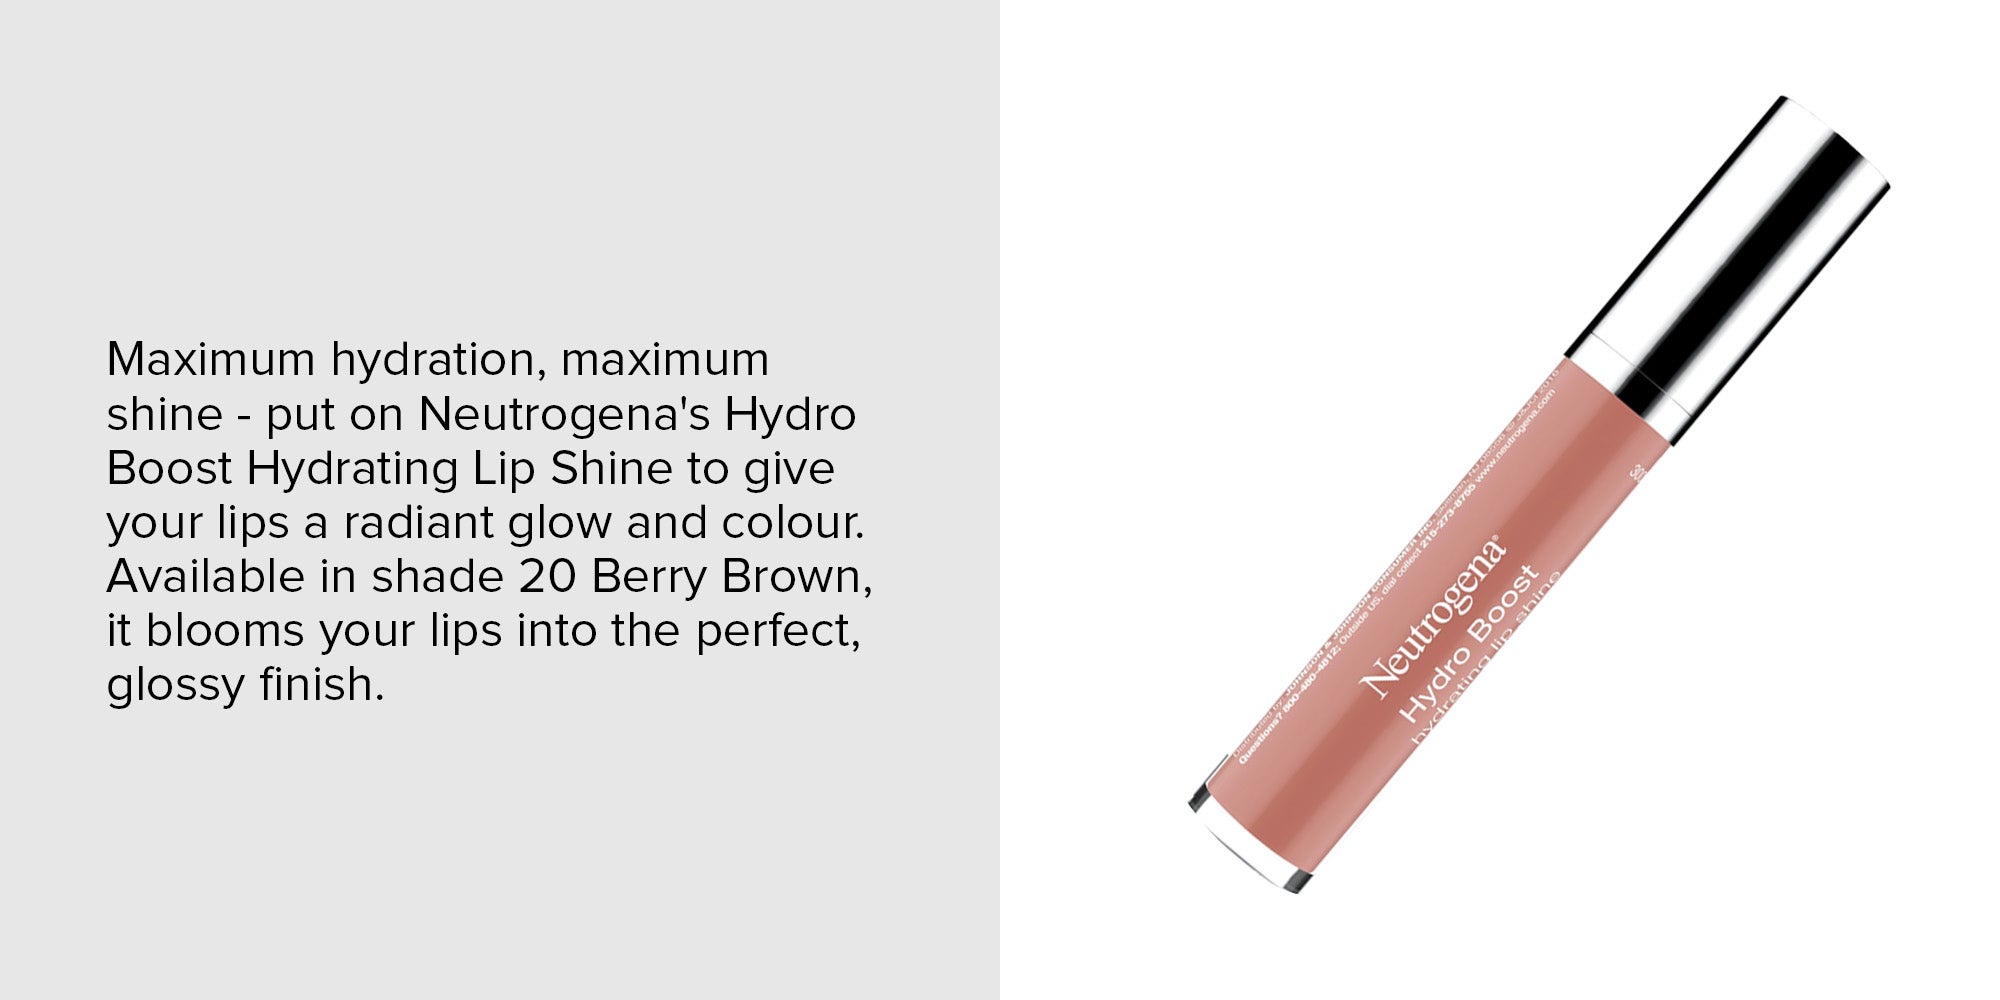 Hydrating Boost Lip Shine 20 Berry Brown